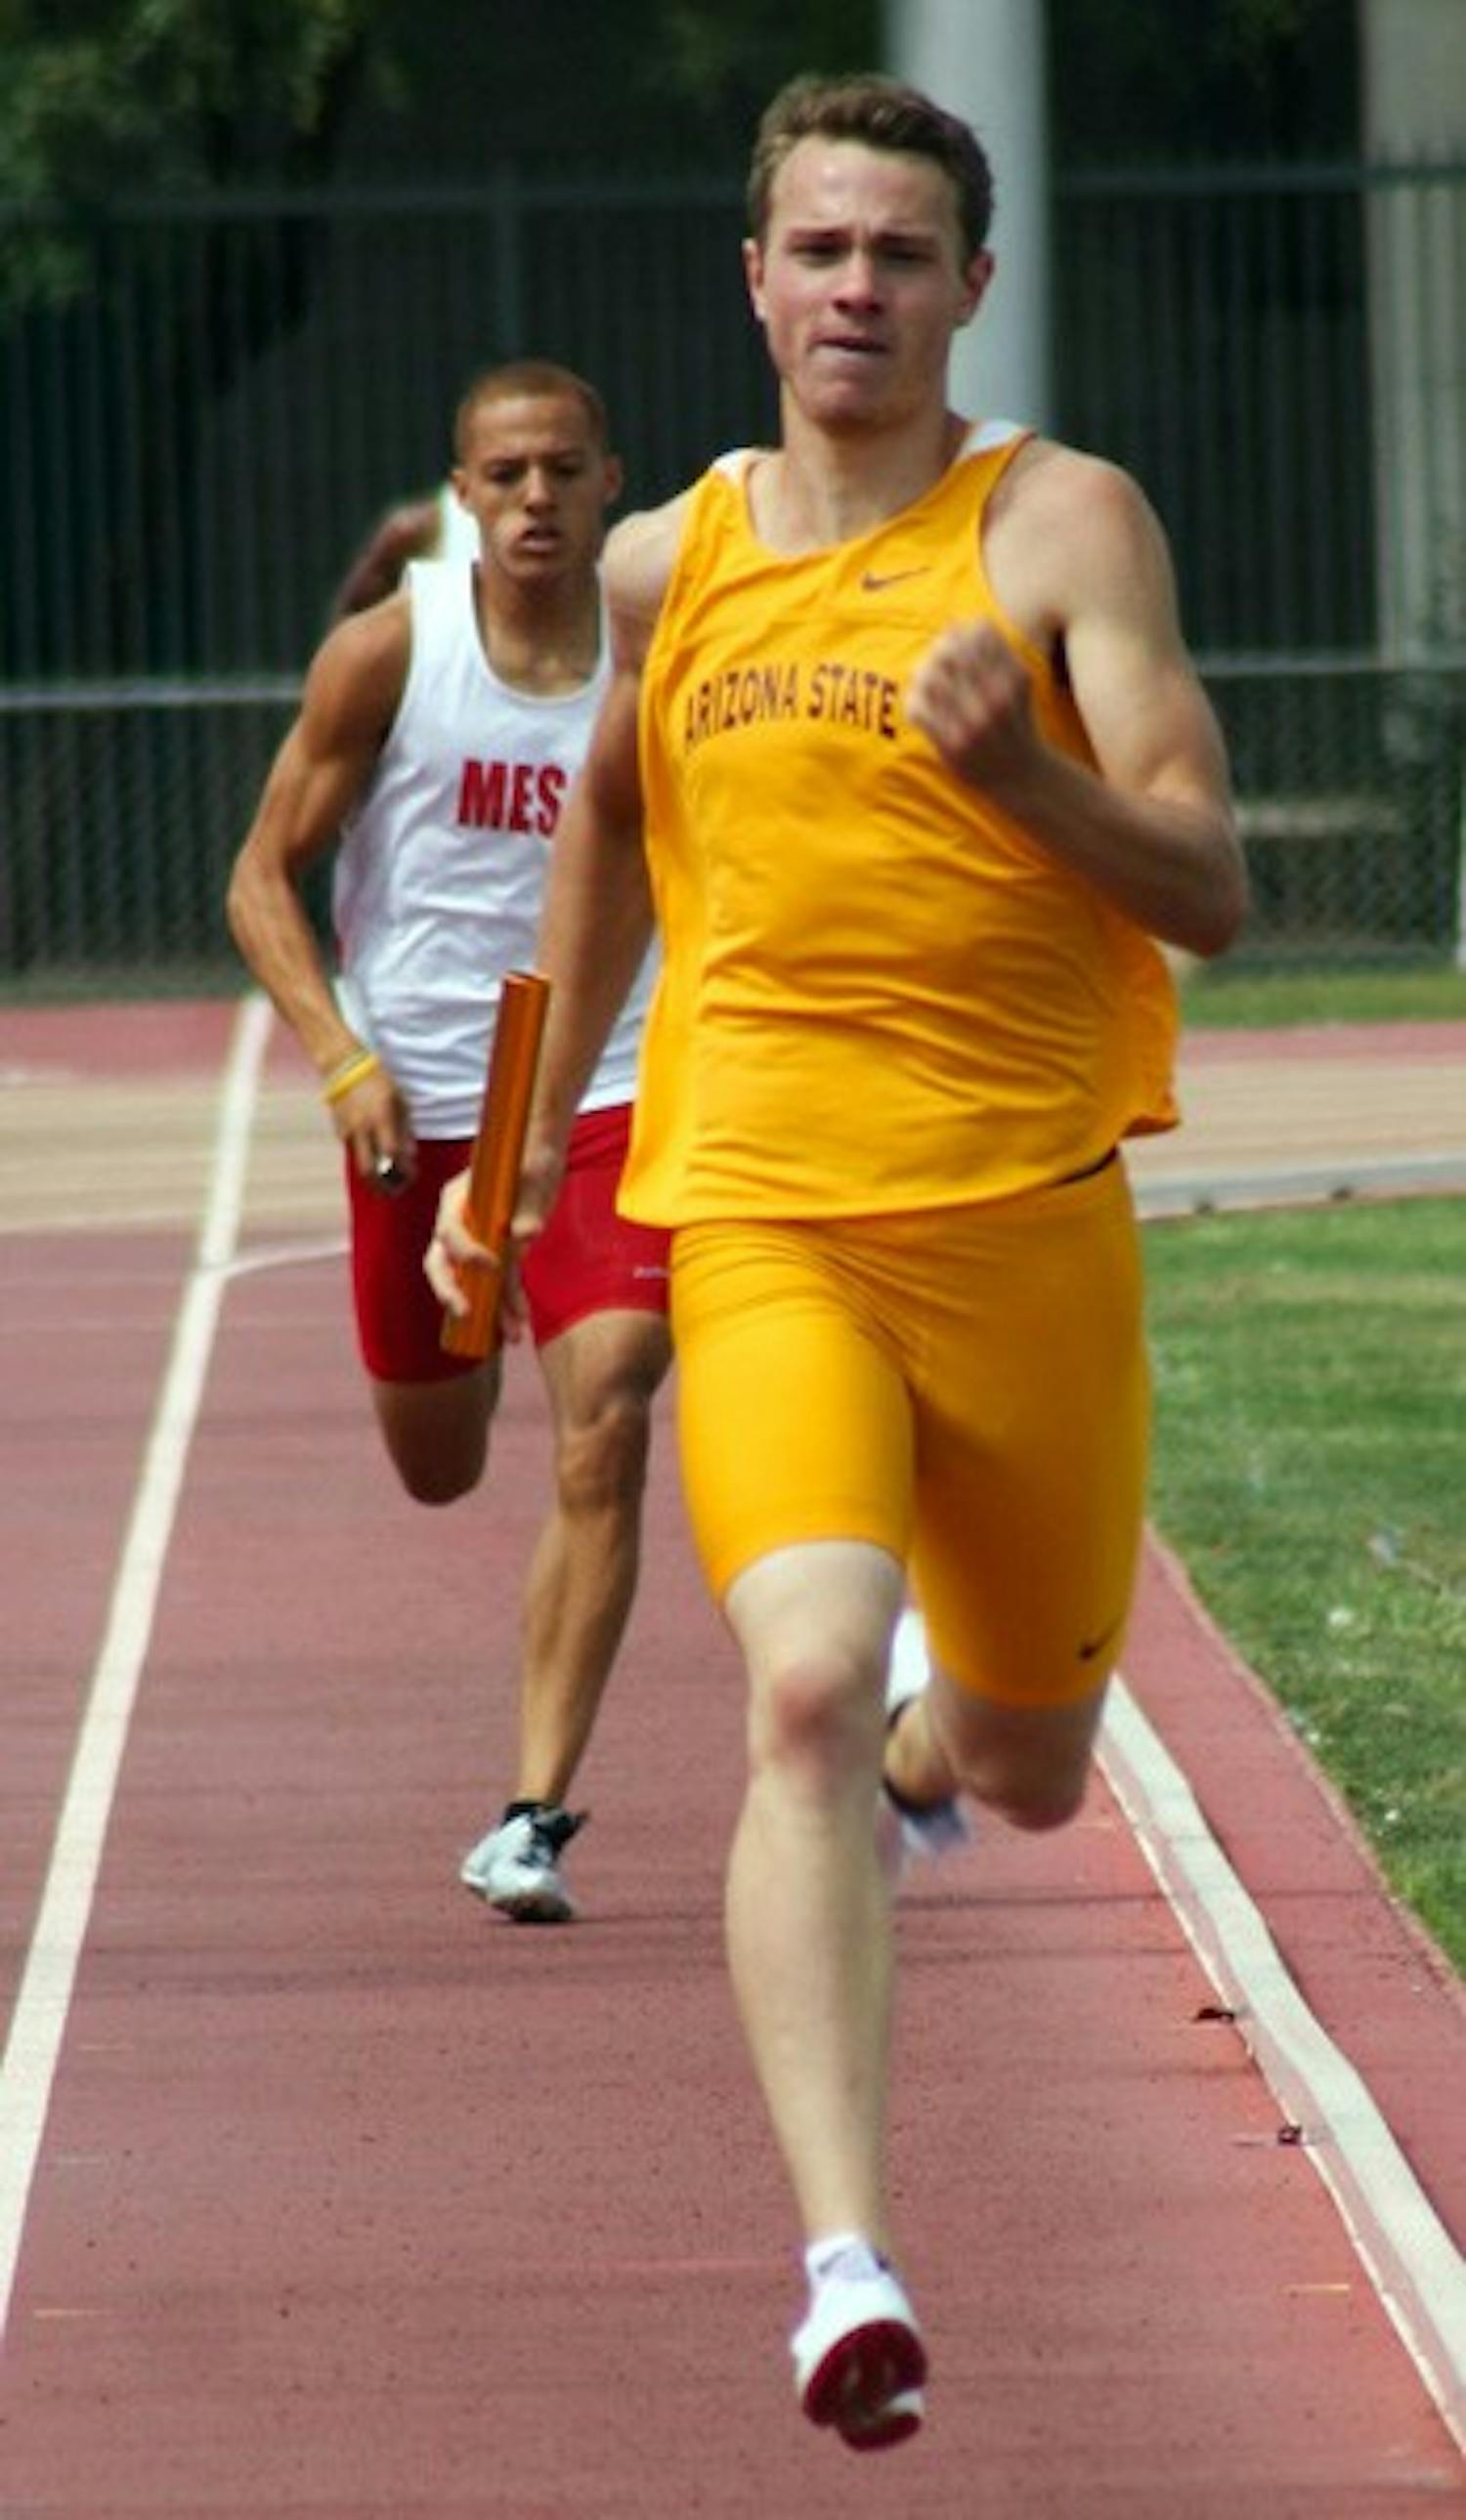 Climbing the Ranks: ASU freshman sprinter Kevin Scheuerman runs his leg of the 4x400 meter relay during the Sun Devil Open on Saturday. The Sun Devils finished first in the event, and the men’s track team moved into the top 25 in the national rankings. (Photo by Lisa Bartoli)